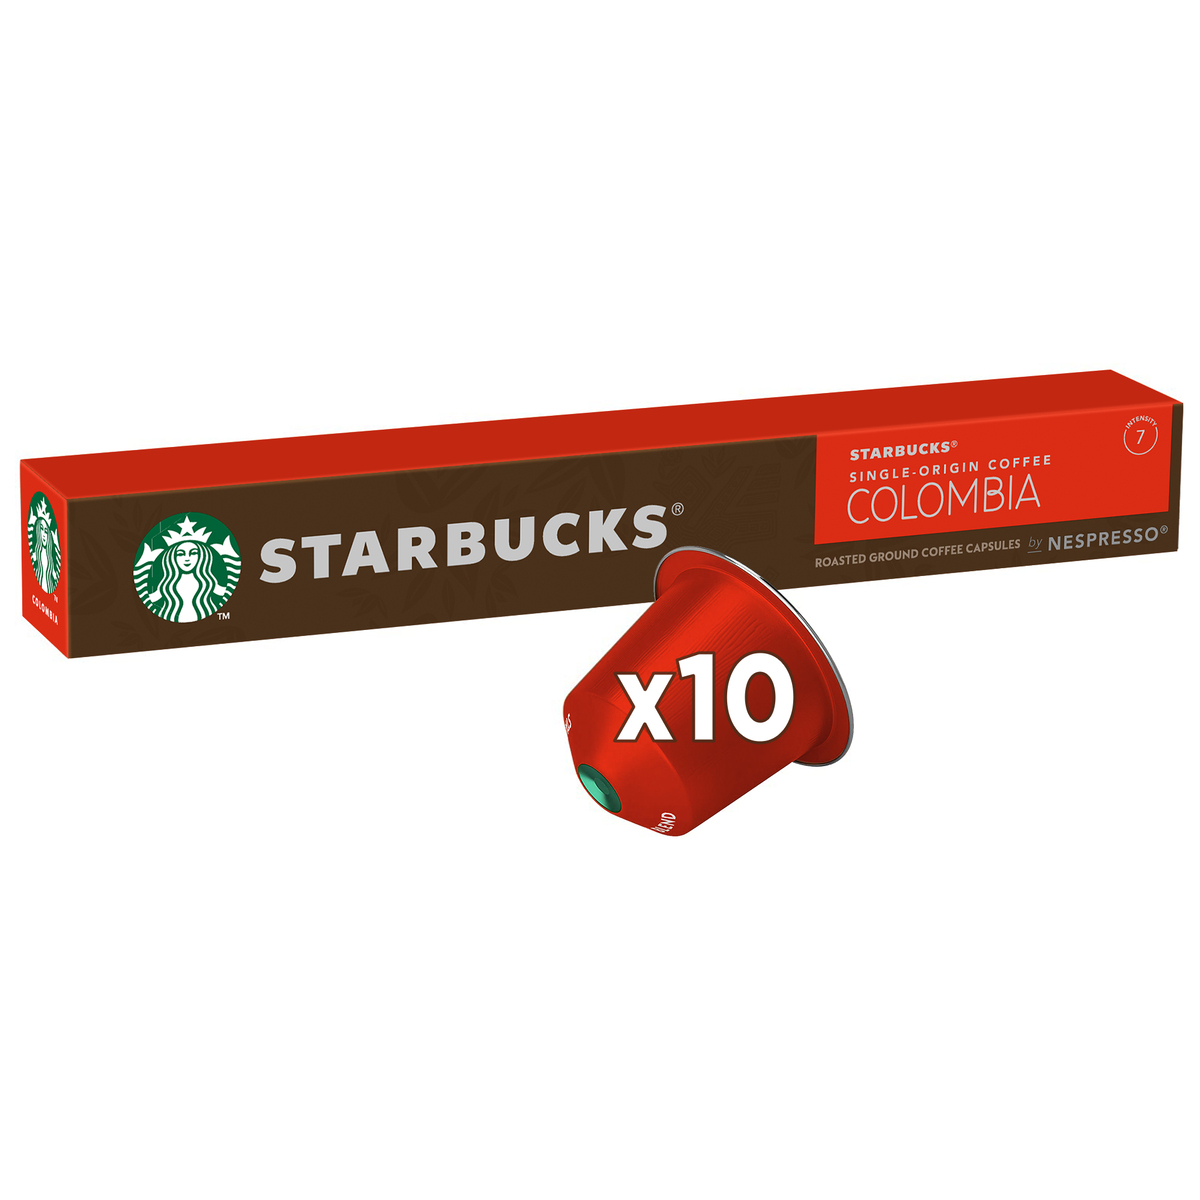 Starbucks Colombia 10 Coffee Capsules by Nespresso Intensity 7, 55g Roast &  Ground Coffee Price in India - Buy Starbucks Colombia 10 Coffee Capsules by  Nespresso Intensity 7, 55g Roast & Ground